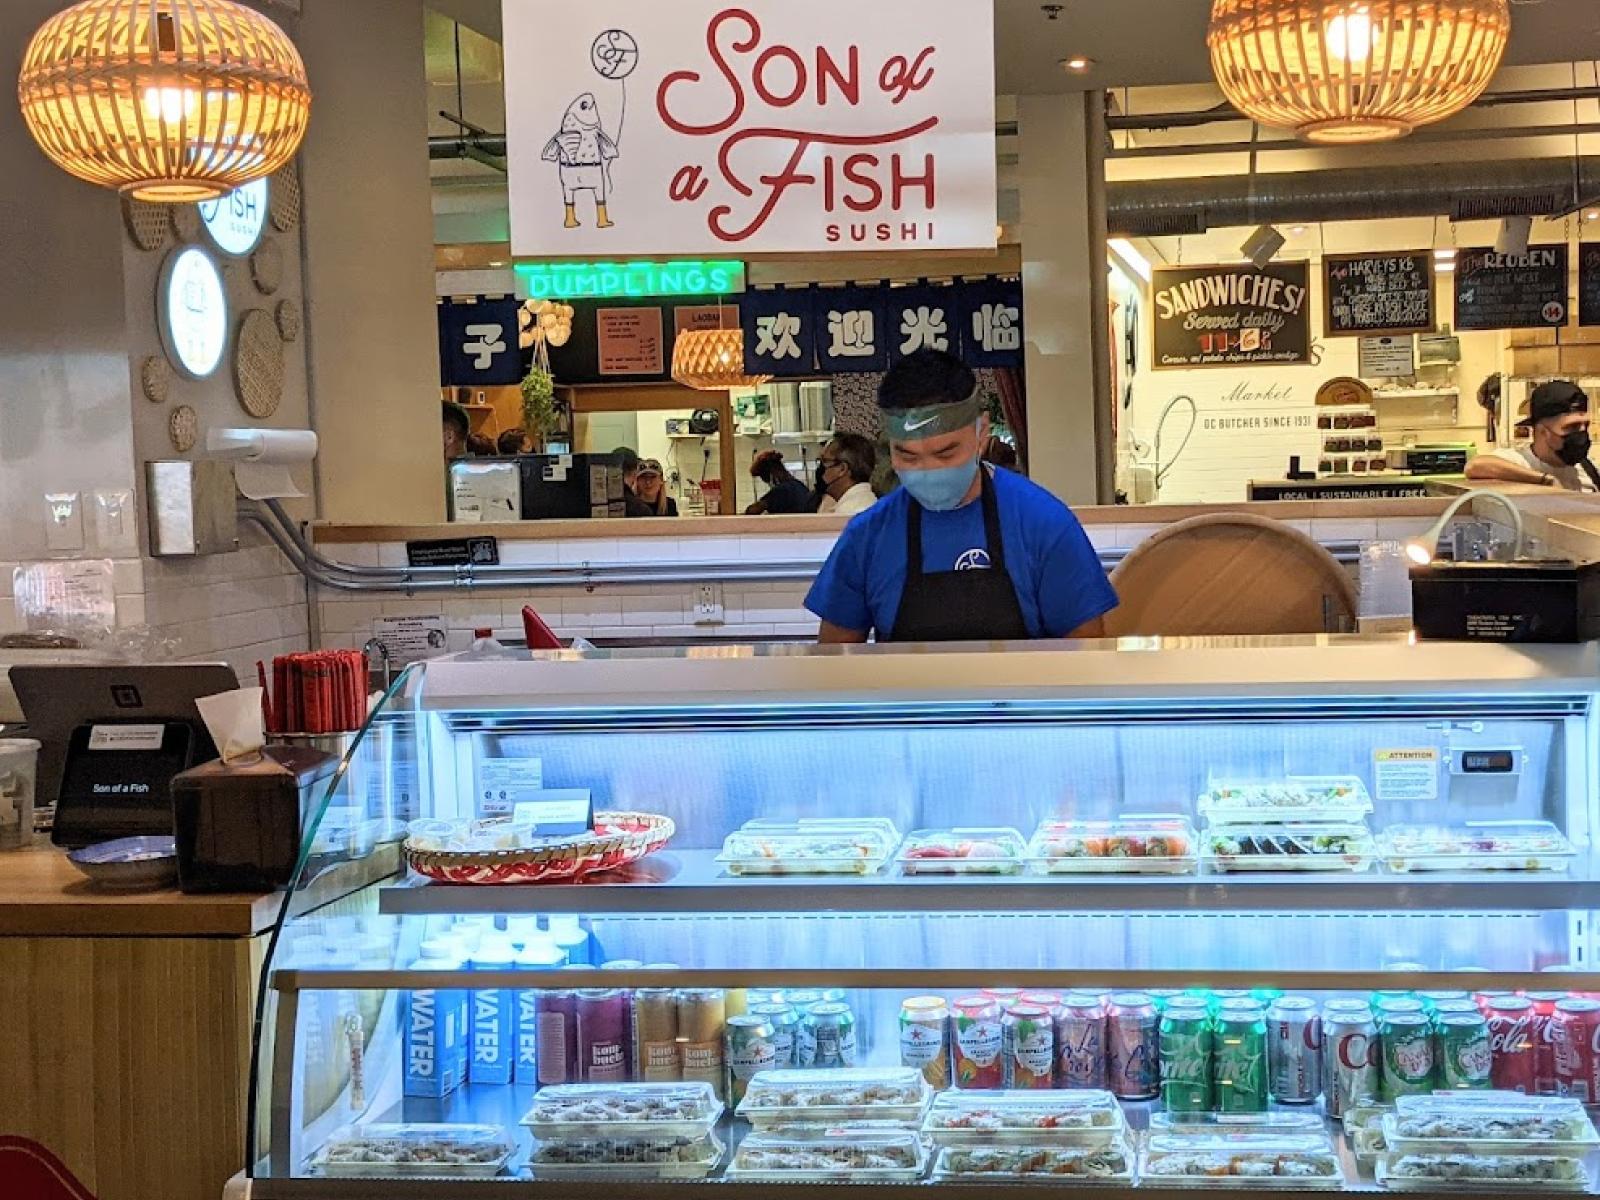 Main image for business titled Son of a Fish